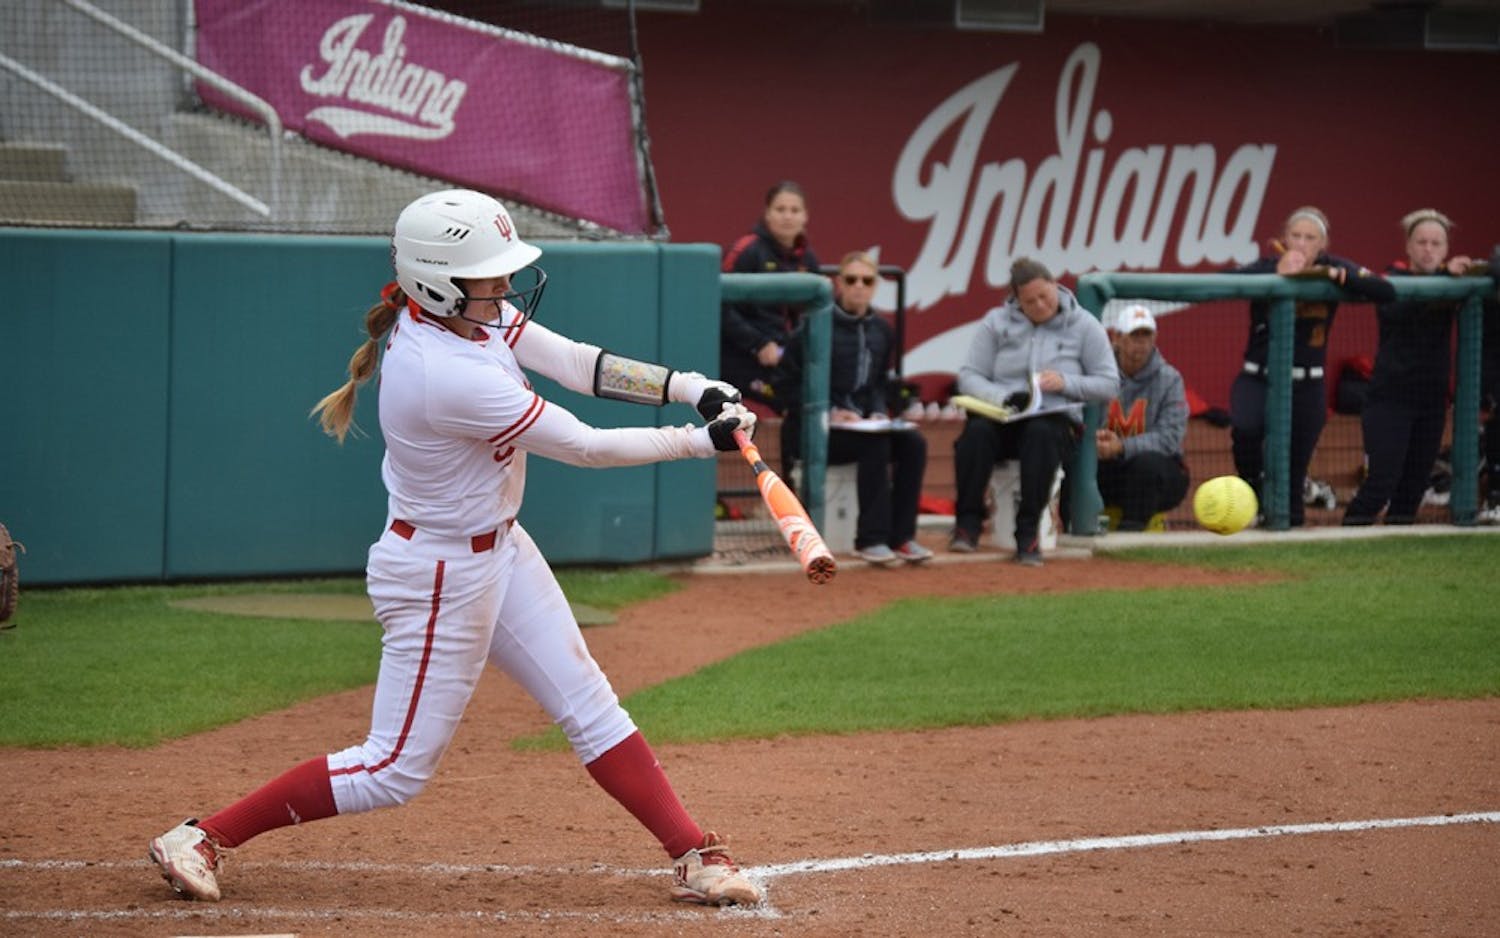 Senior Erin Lehman hits the ball in Friday's&nbsp;second game against Maryland.  The Hoosiers swept the Terrapins&nbsp;in the weekend series.